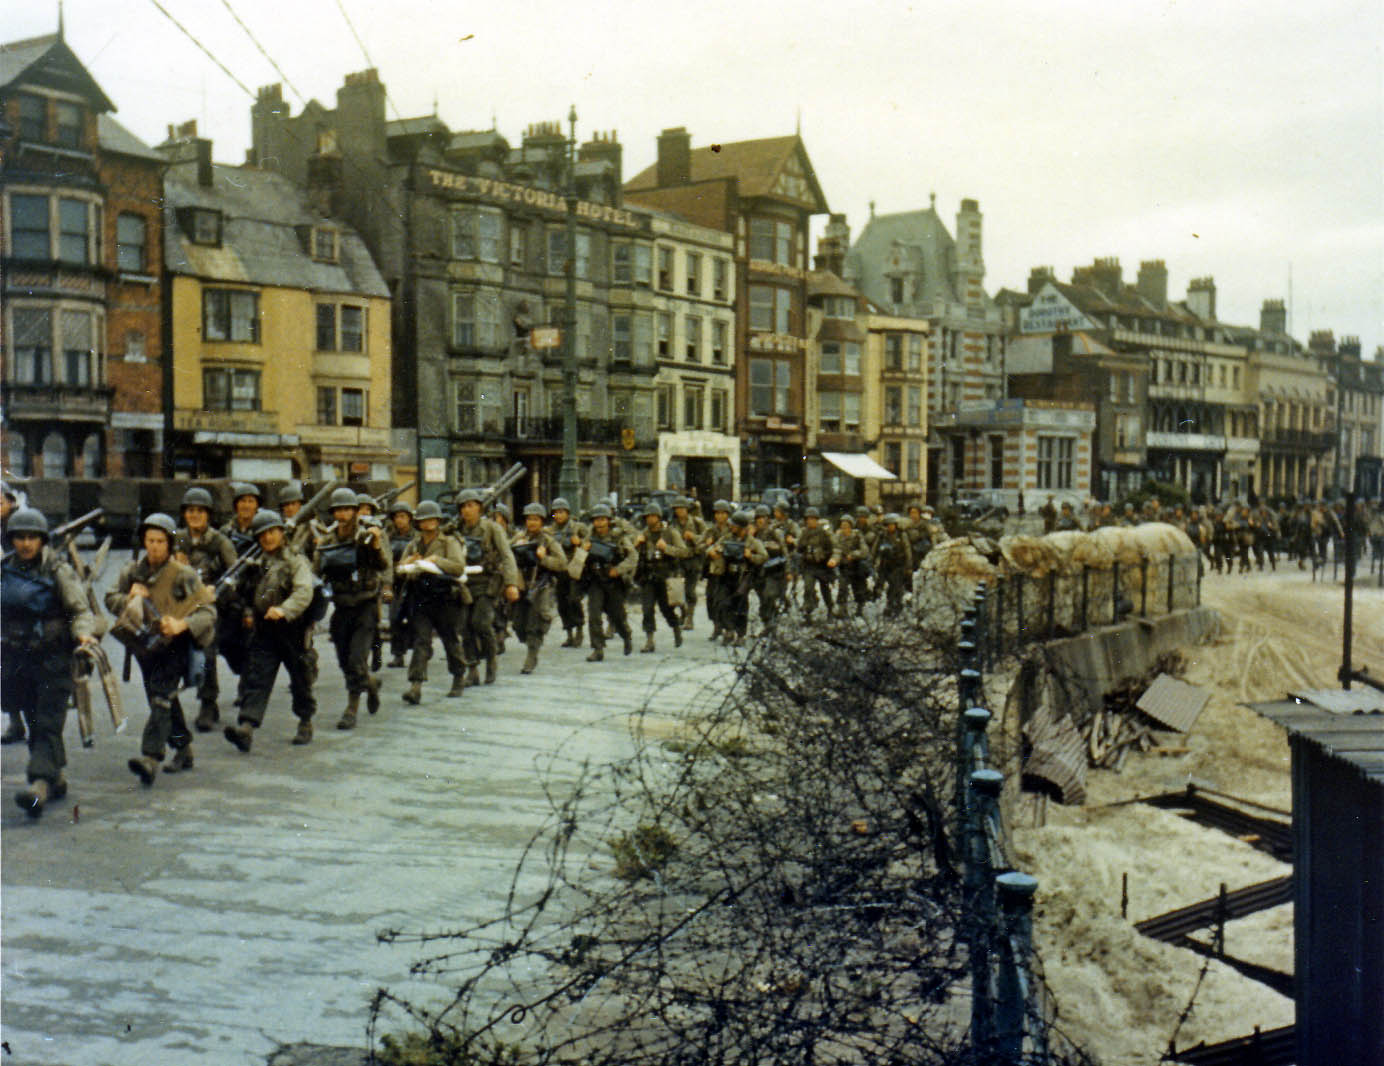 US troops ready to board landing ships at Weymouth, Dorset for the Normandy Invasion, May-June 1944. Photo 3 of 3.